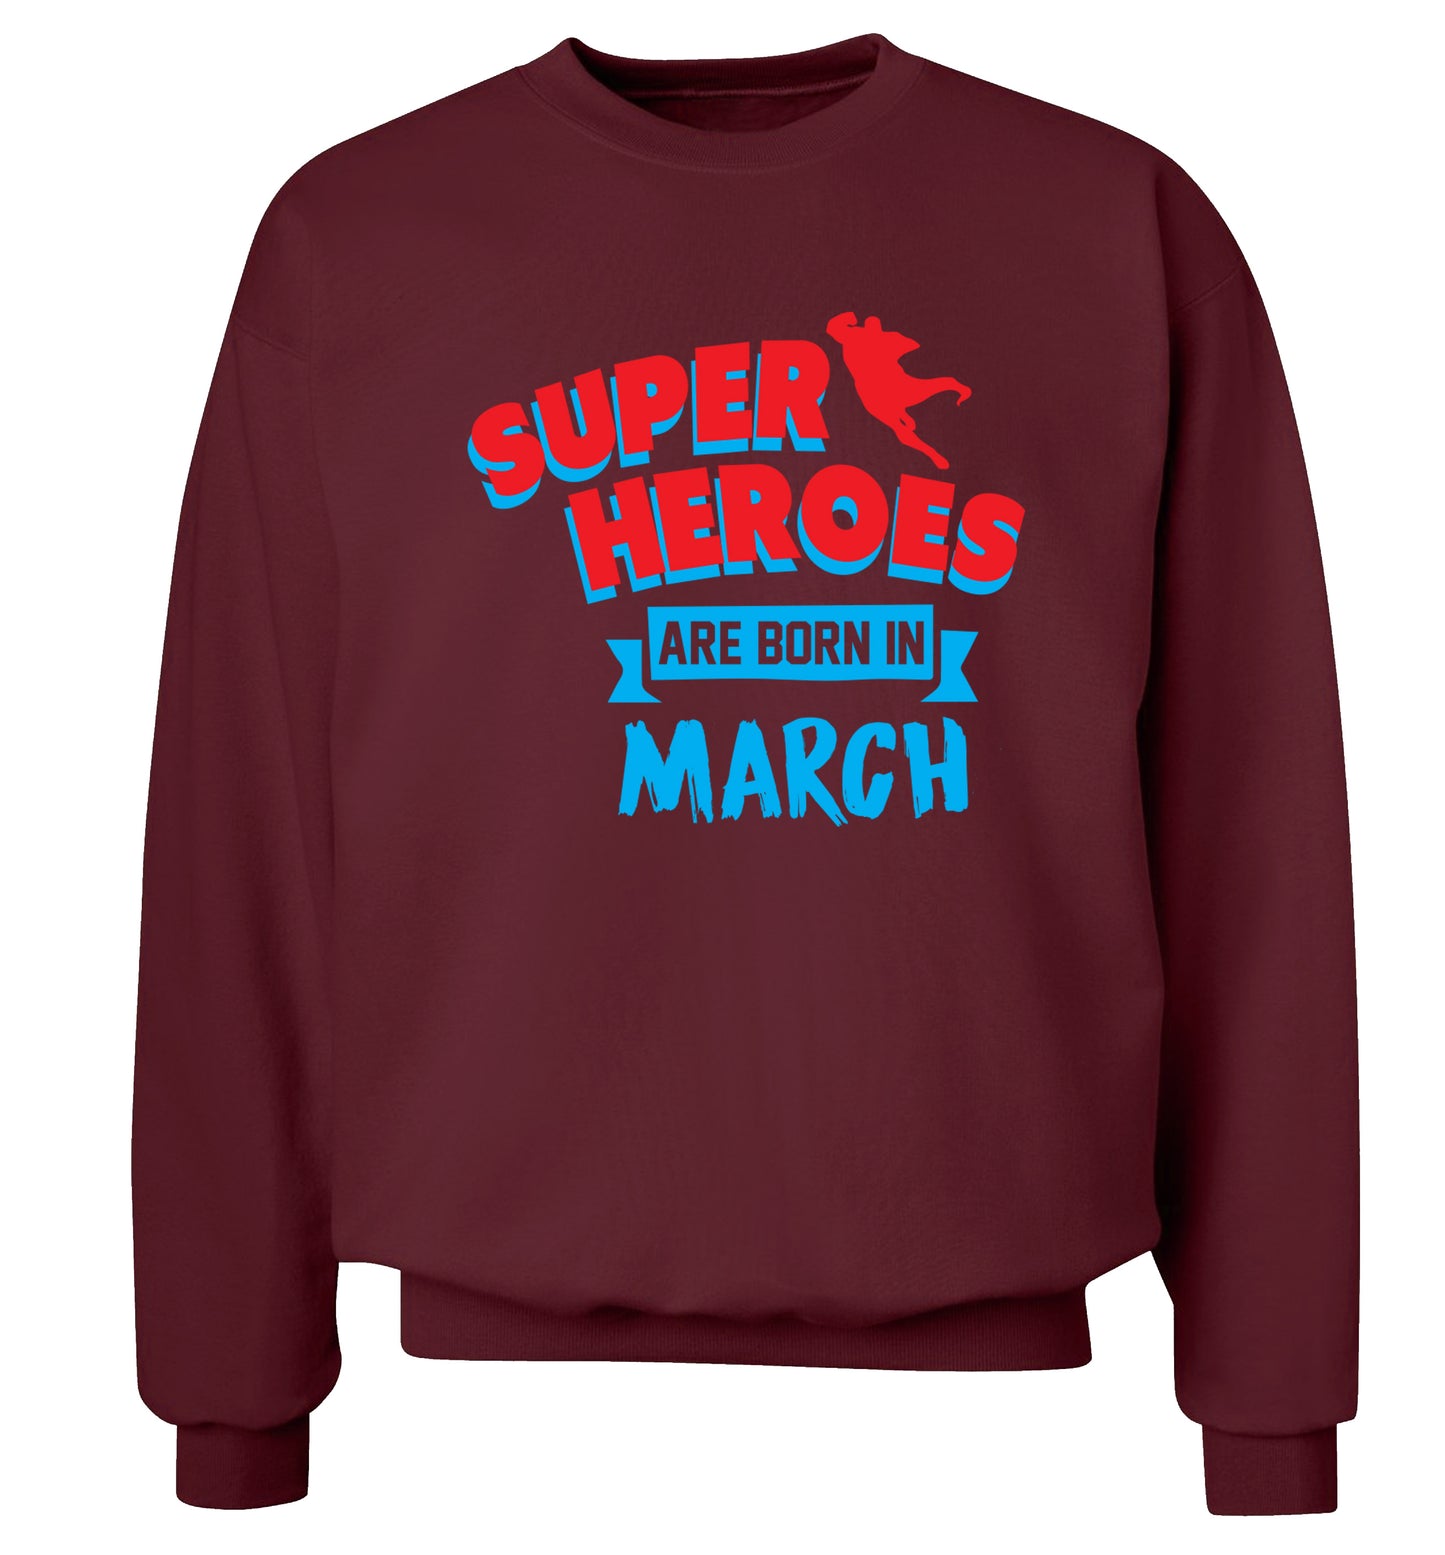 Superheros are born in March Adult's unisex maroon Sweater 2XL